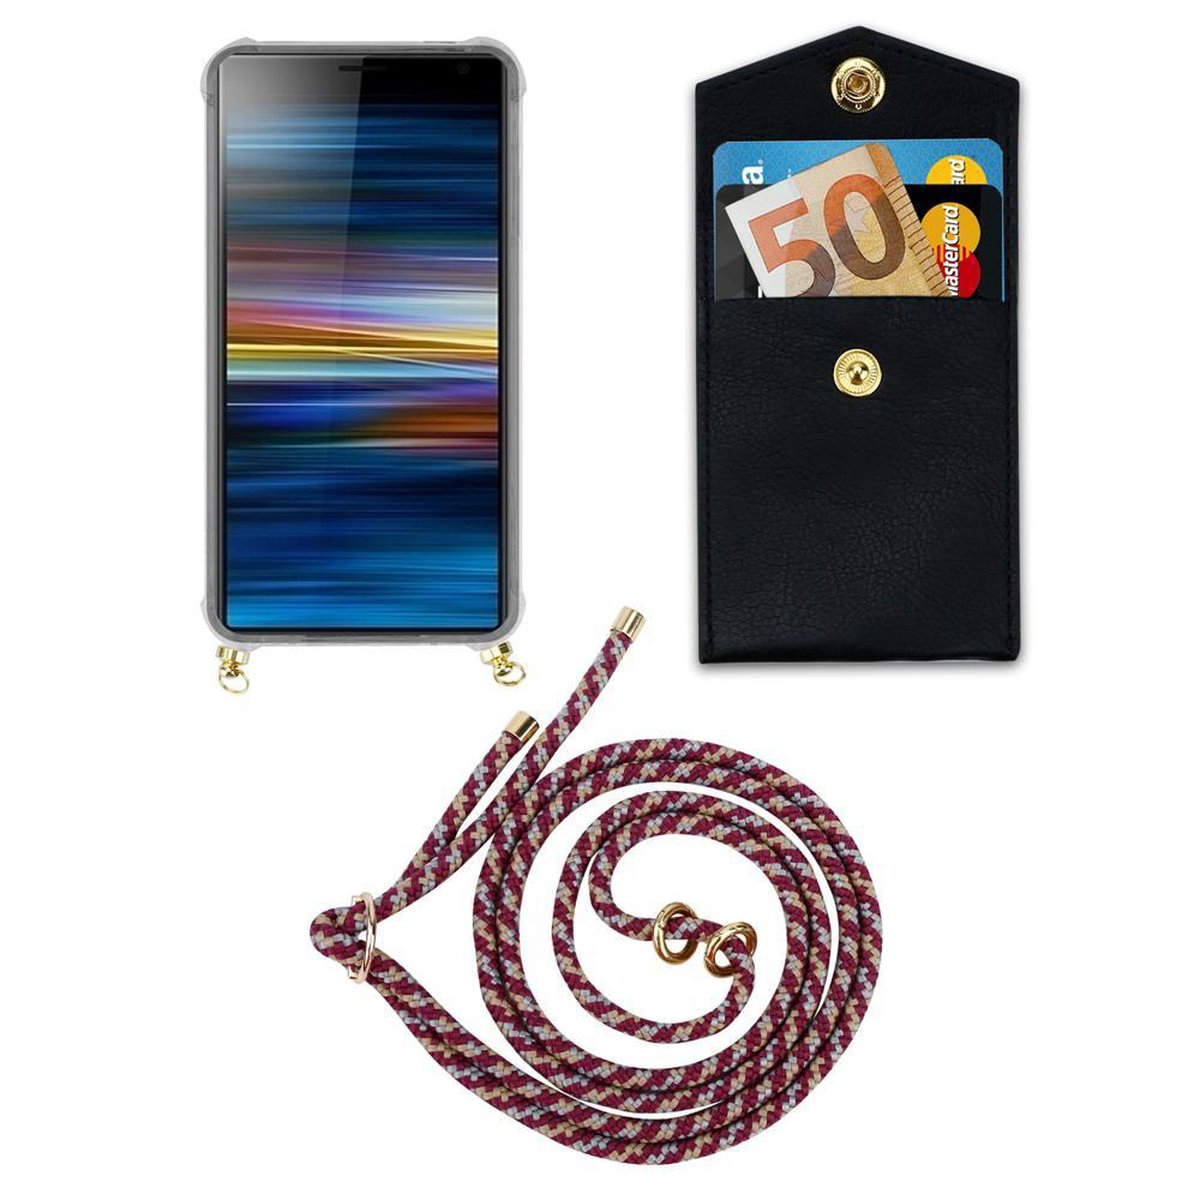 mit Xperia PLUS, Sony, WEIß 10 GELB Backcover, Hülle, Ringen, Kordel CADORABO Kette abnehmbarer Handy und Band ROT Gold